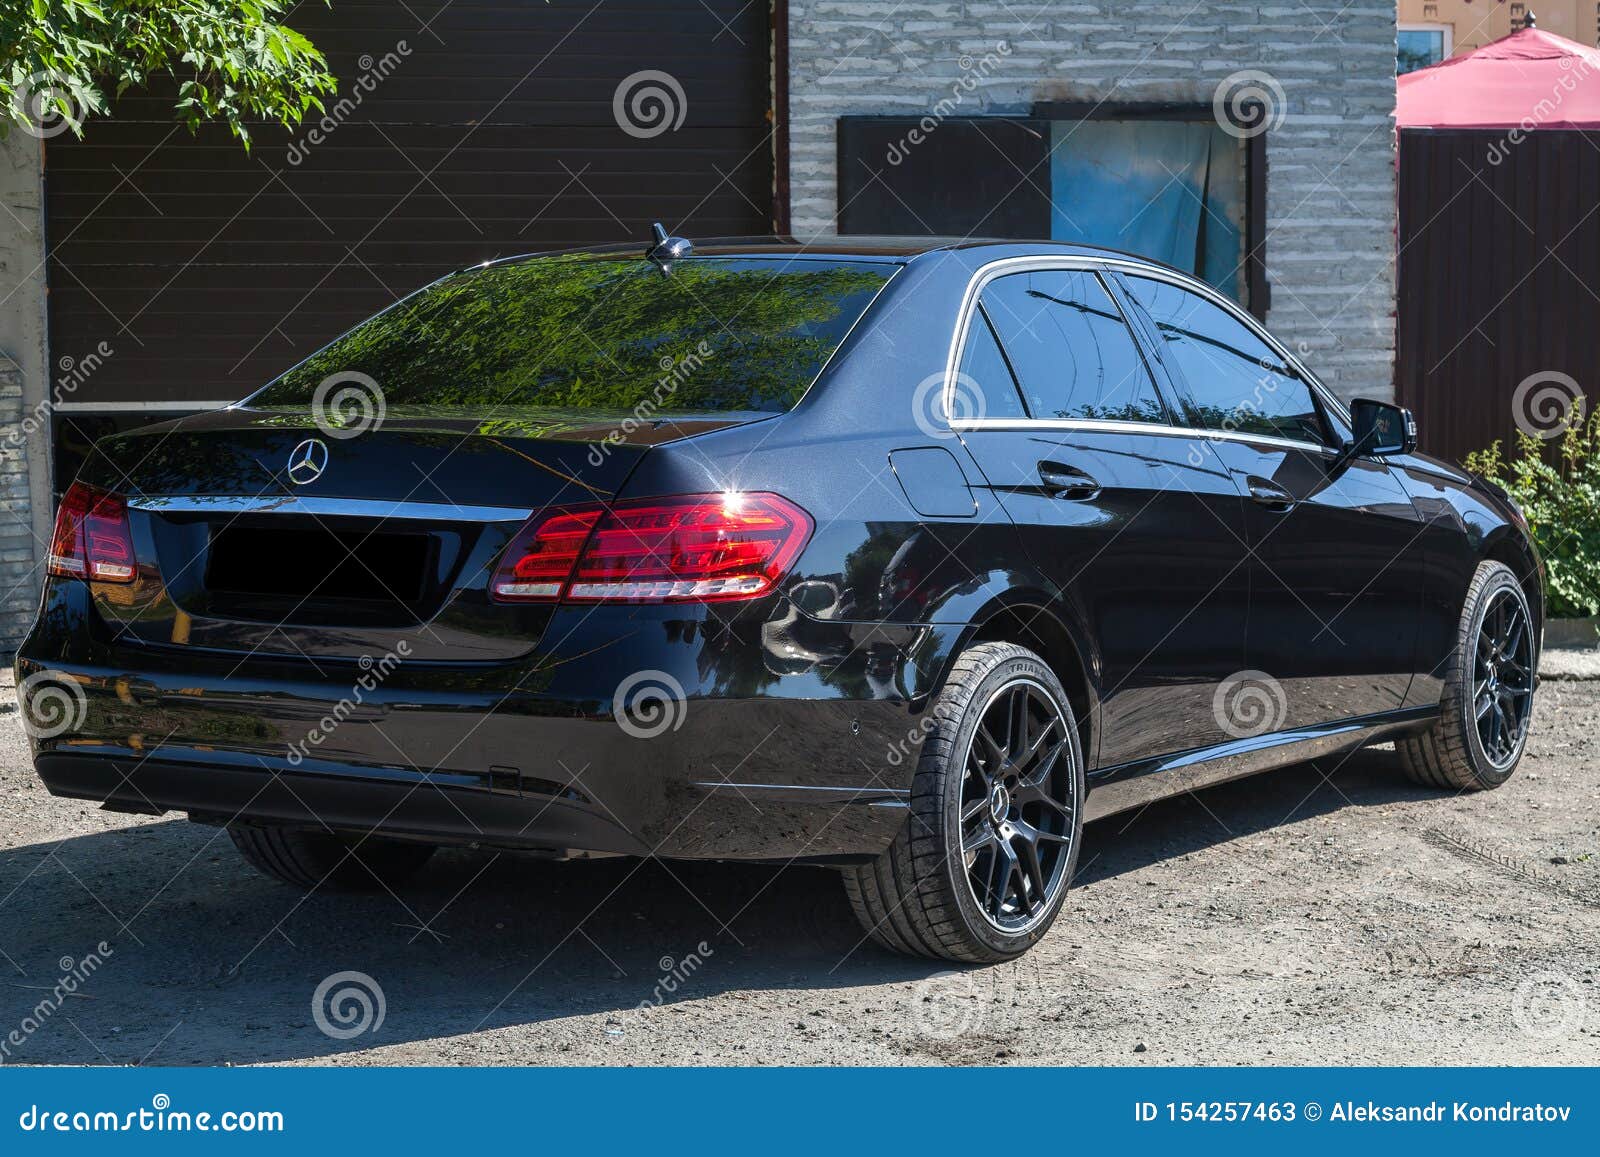 Black Mercedes Benz E Class 50 13 Year Rear View With Dark Gray Interior In Excellent Condition In A Parking Space Near Green Editorial Stock Photo Image Of City Elegant